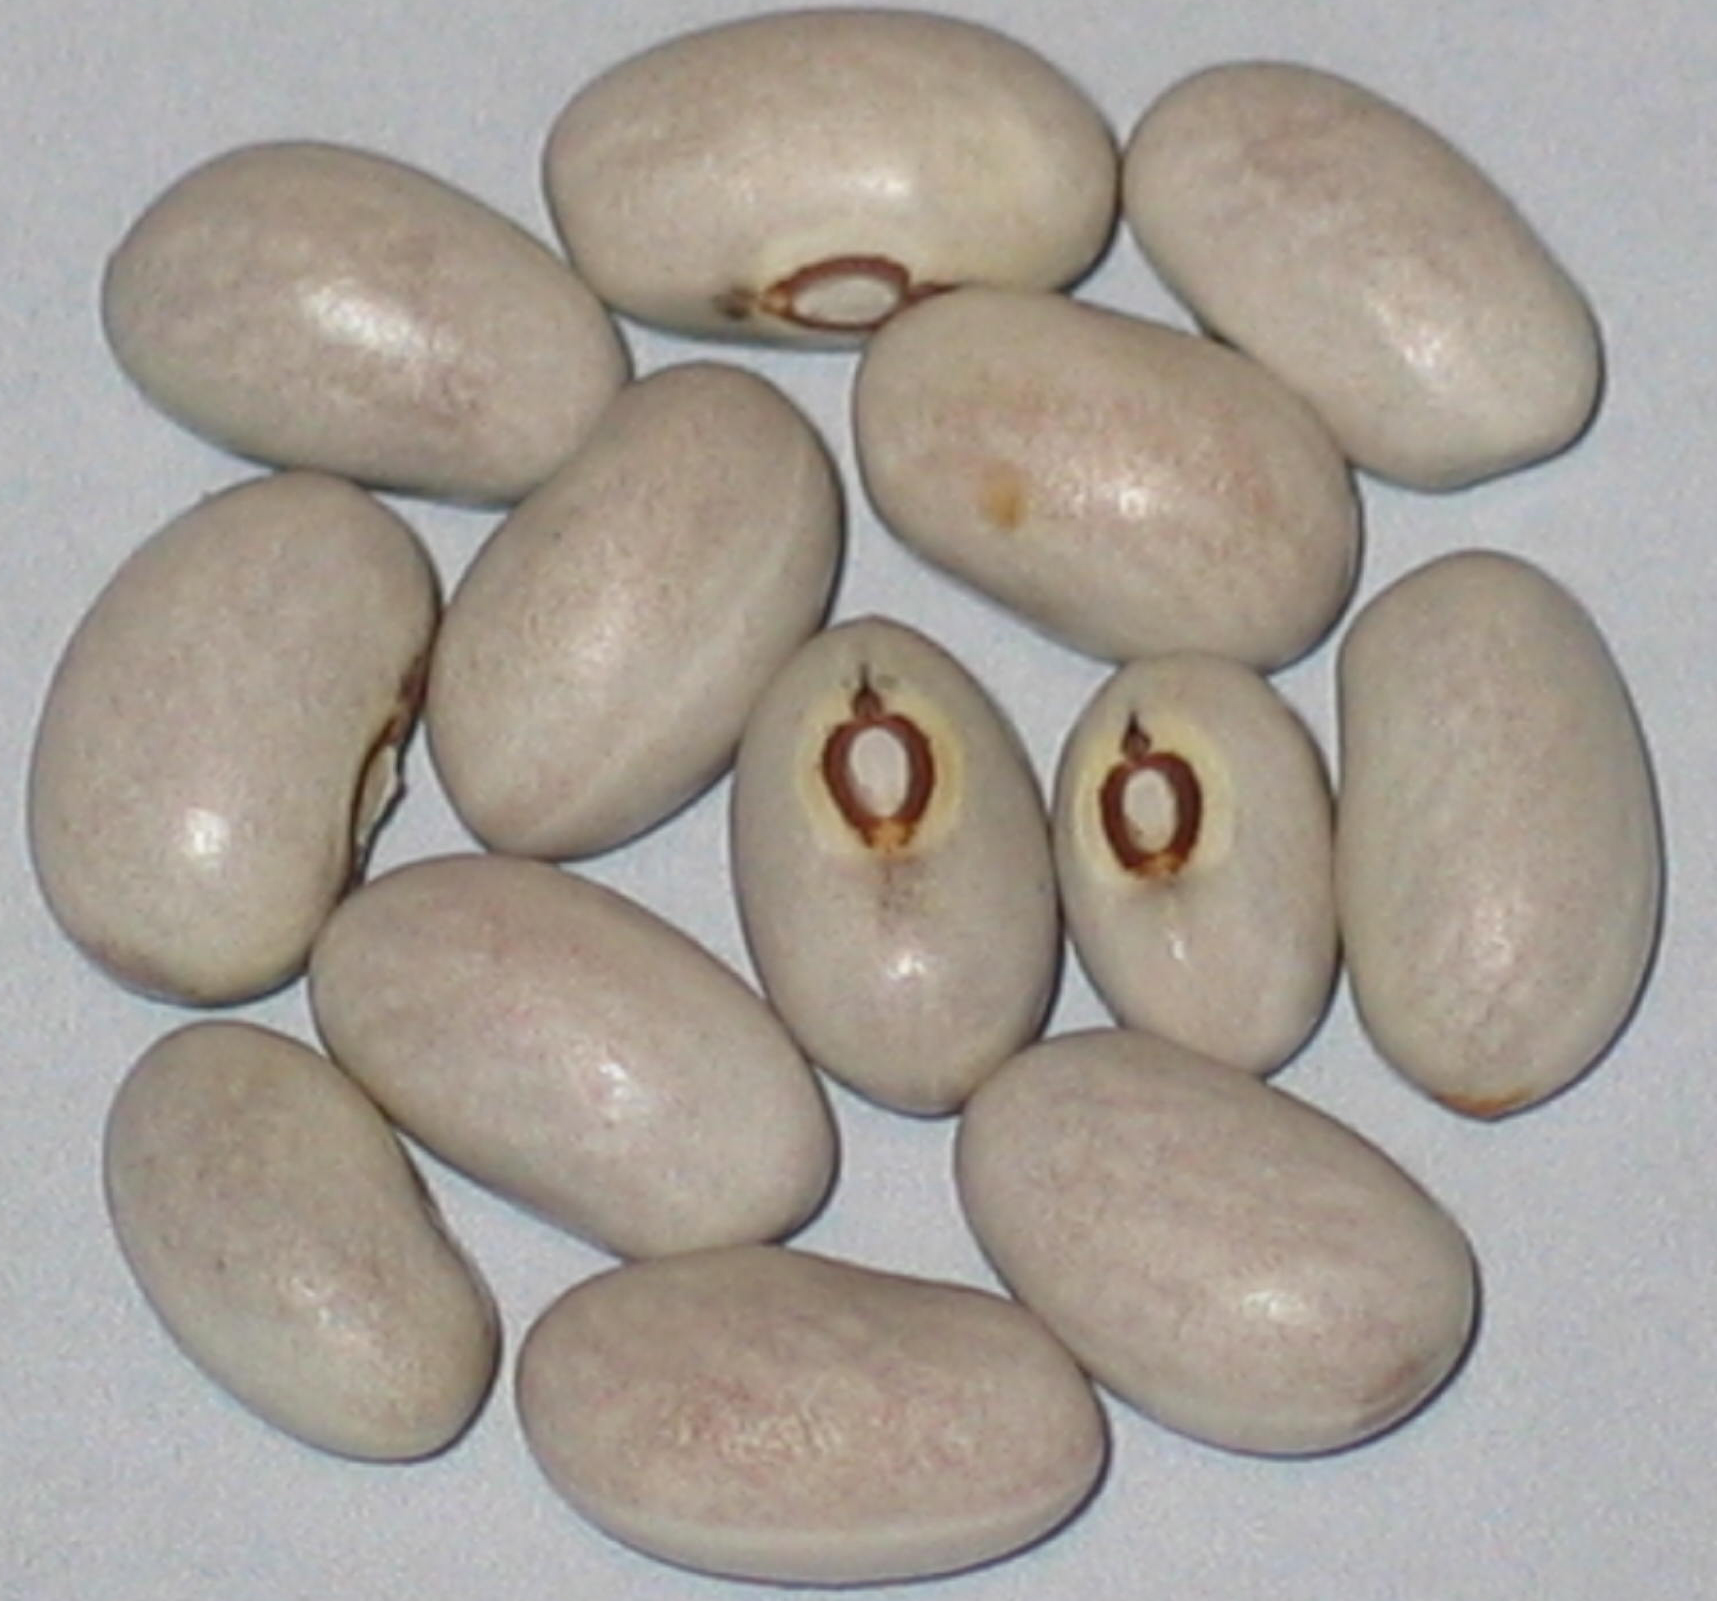 image of Buddha's Bellybutton beans